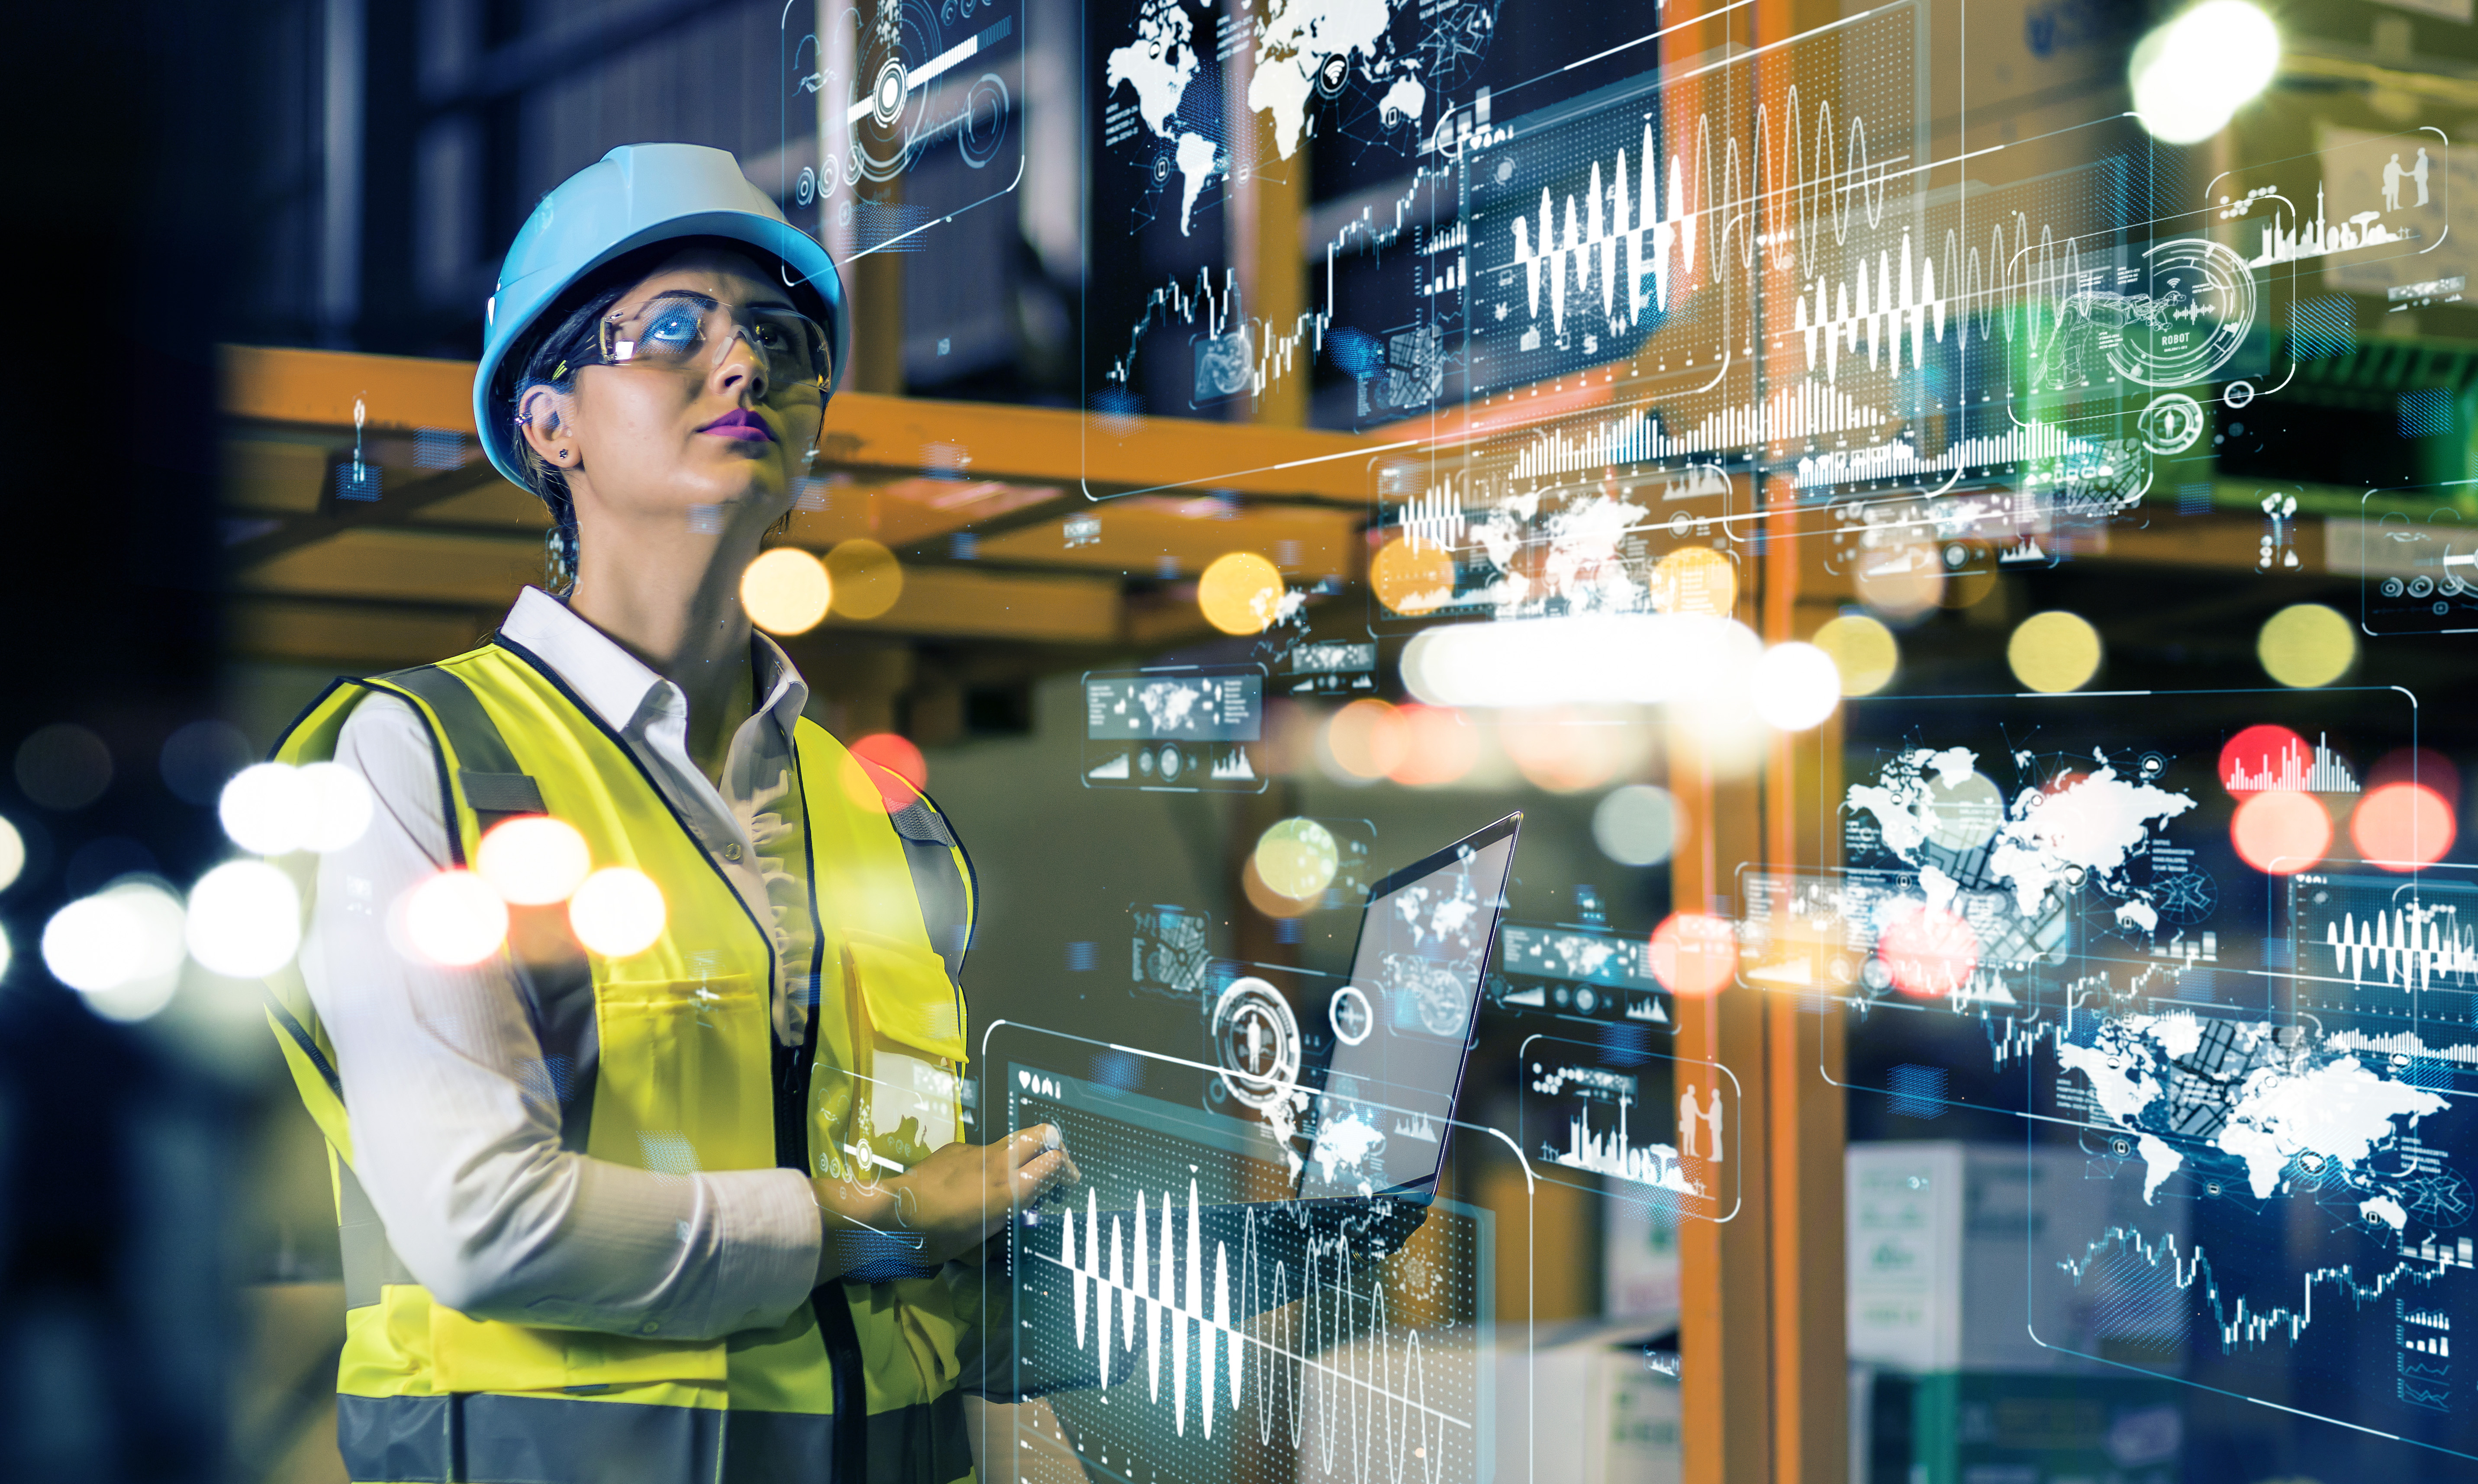 Digital transformation in manufacturing: what does it actually mean?